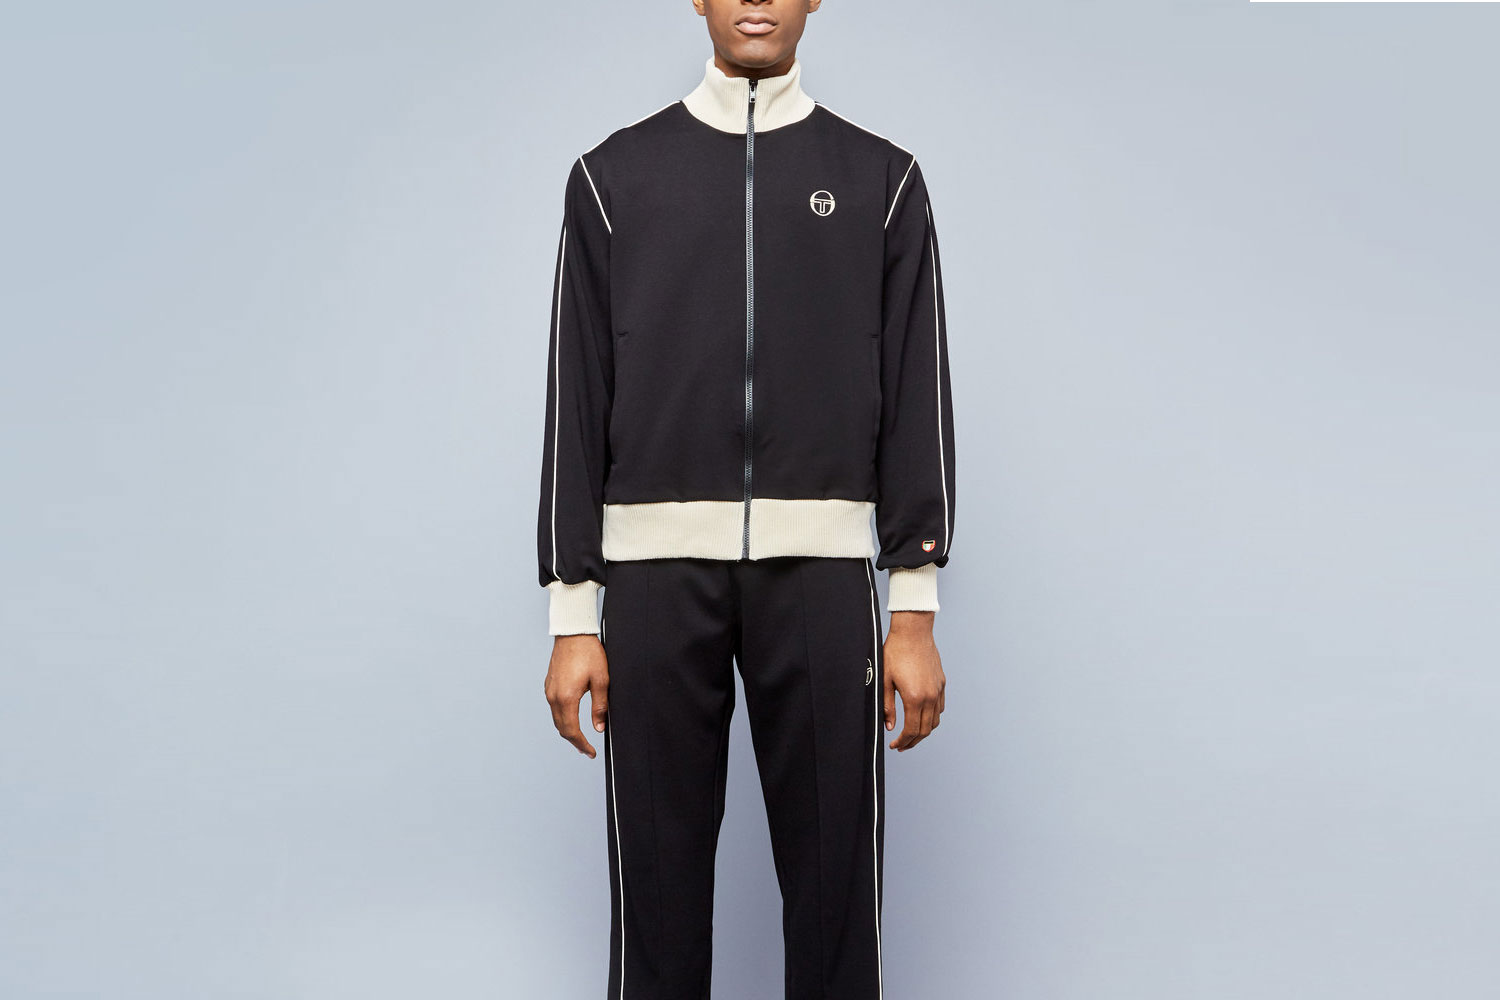 A Style Guide - How To Wear Stylish Track Pants For Men! - Bewakoof Blog